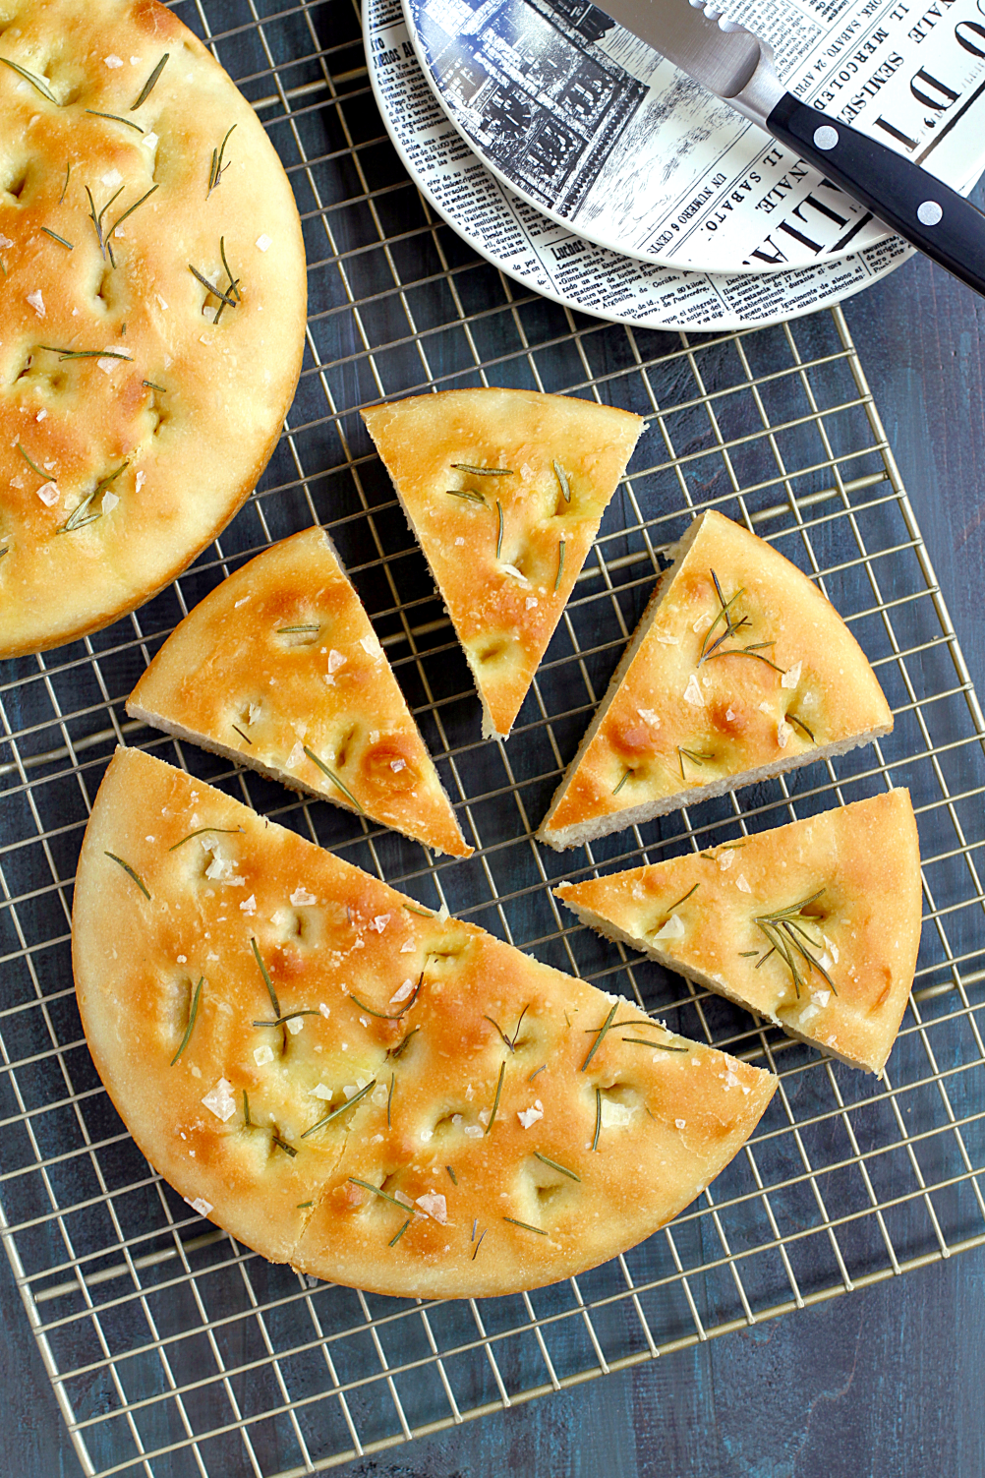 http://www.twoofakindcooks.com/wp-content/uploads/2017/04/Rosemary-Focaccia-Rounds.png